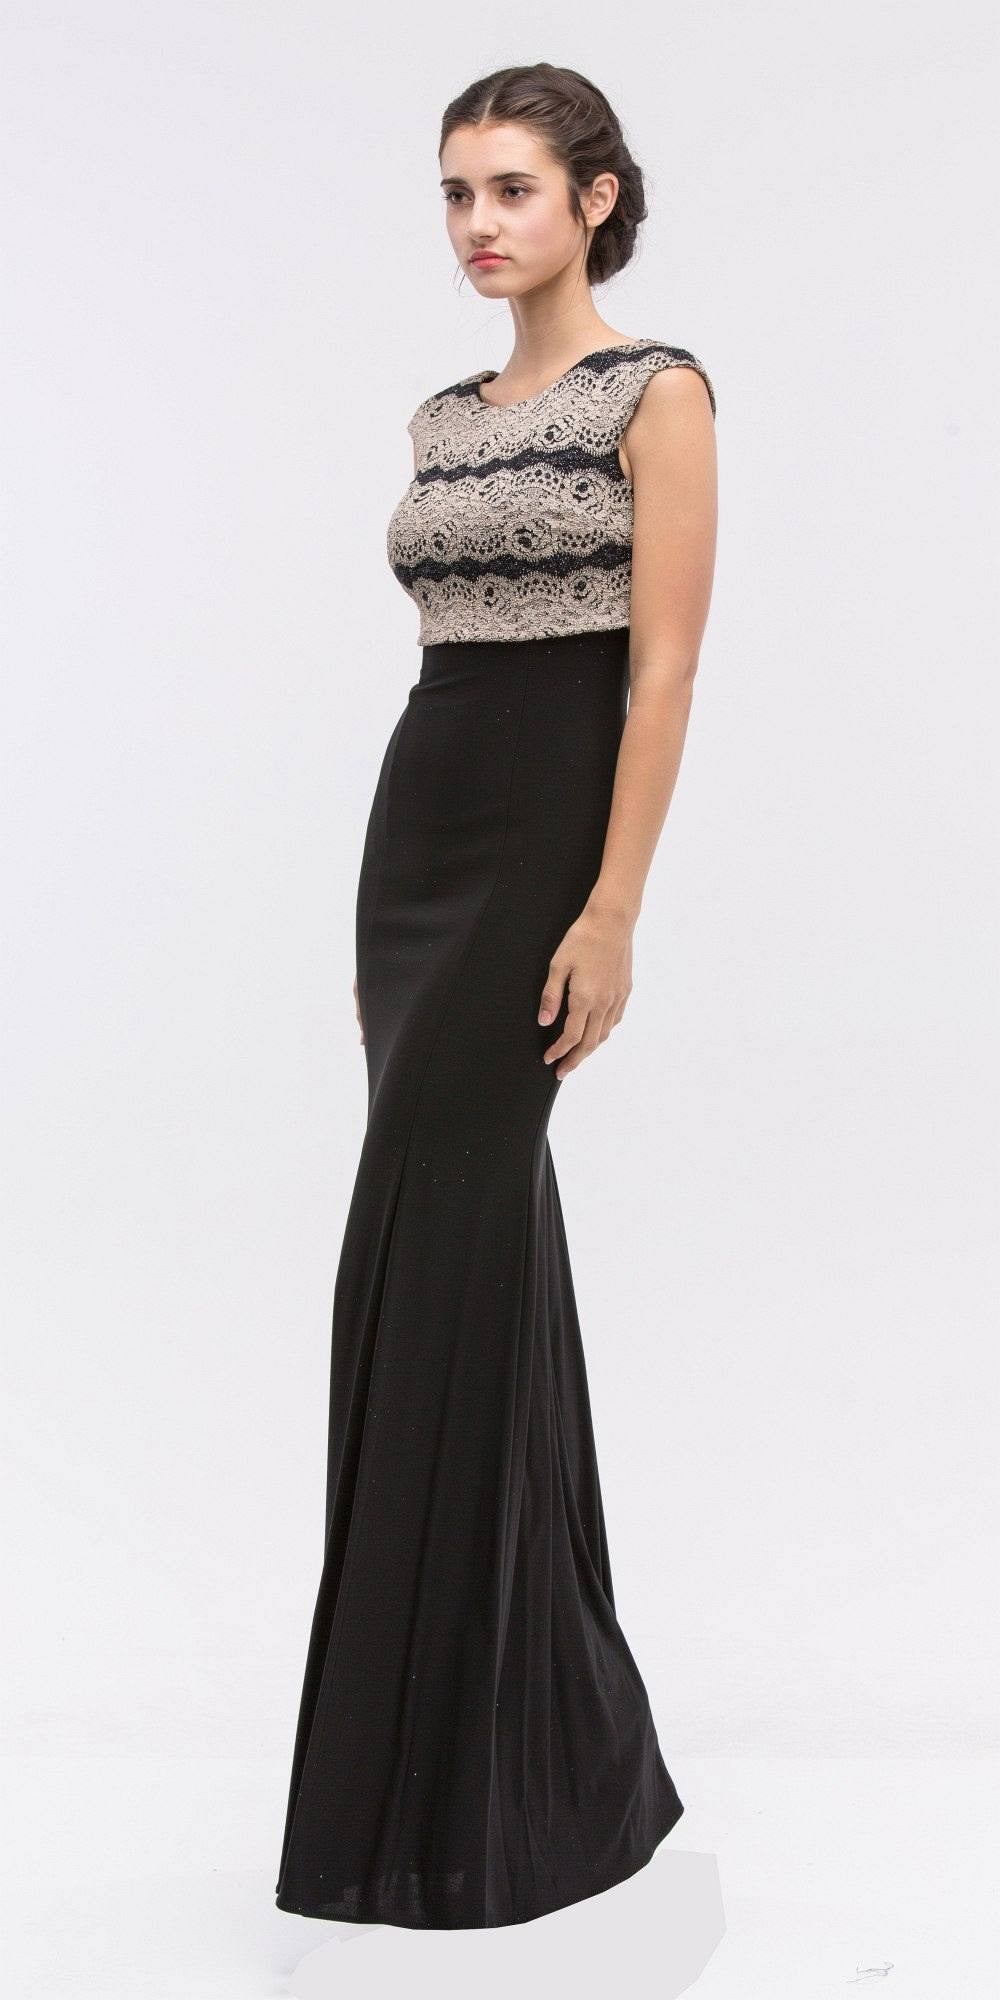 Sleeveless Black Jersey Fitted Prom Gown with Gold Lace Bodice 